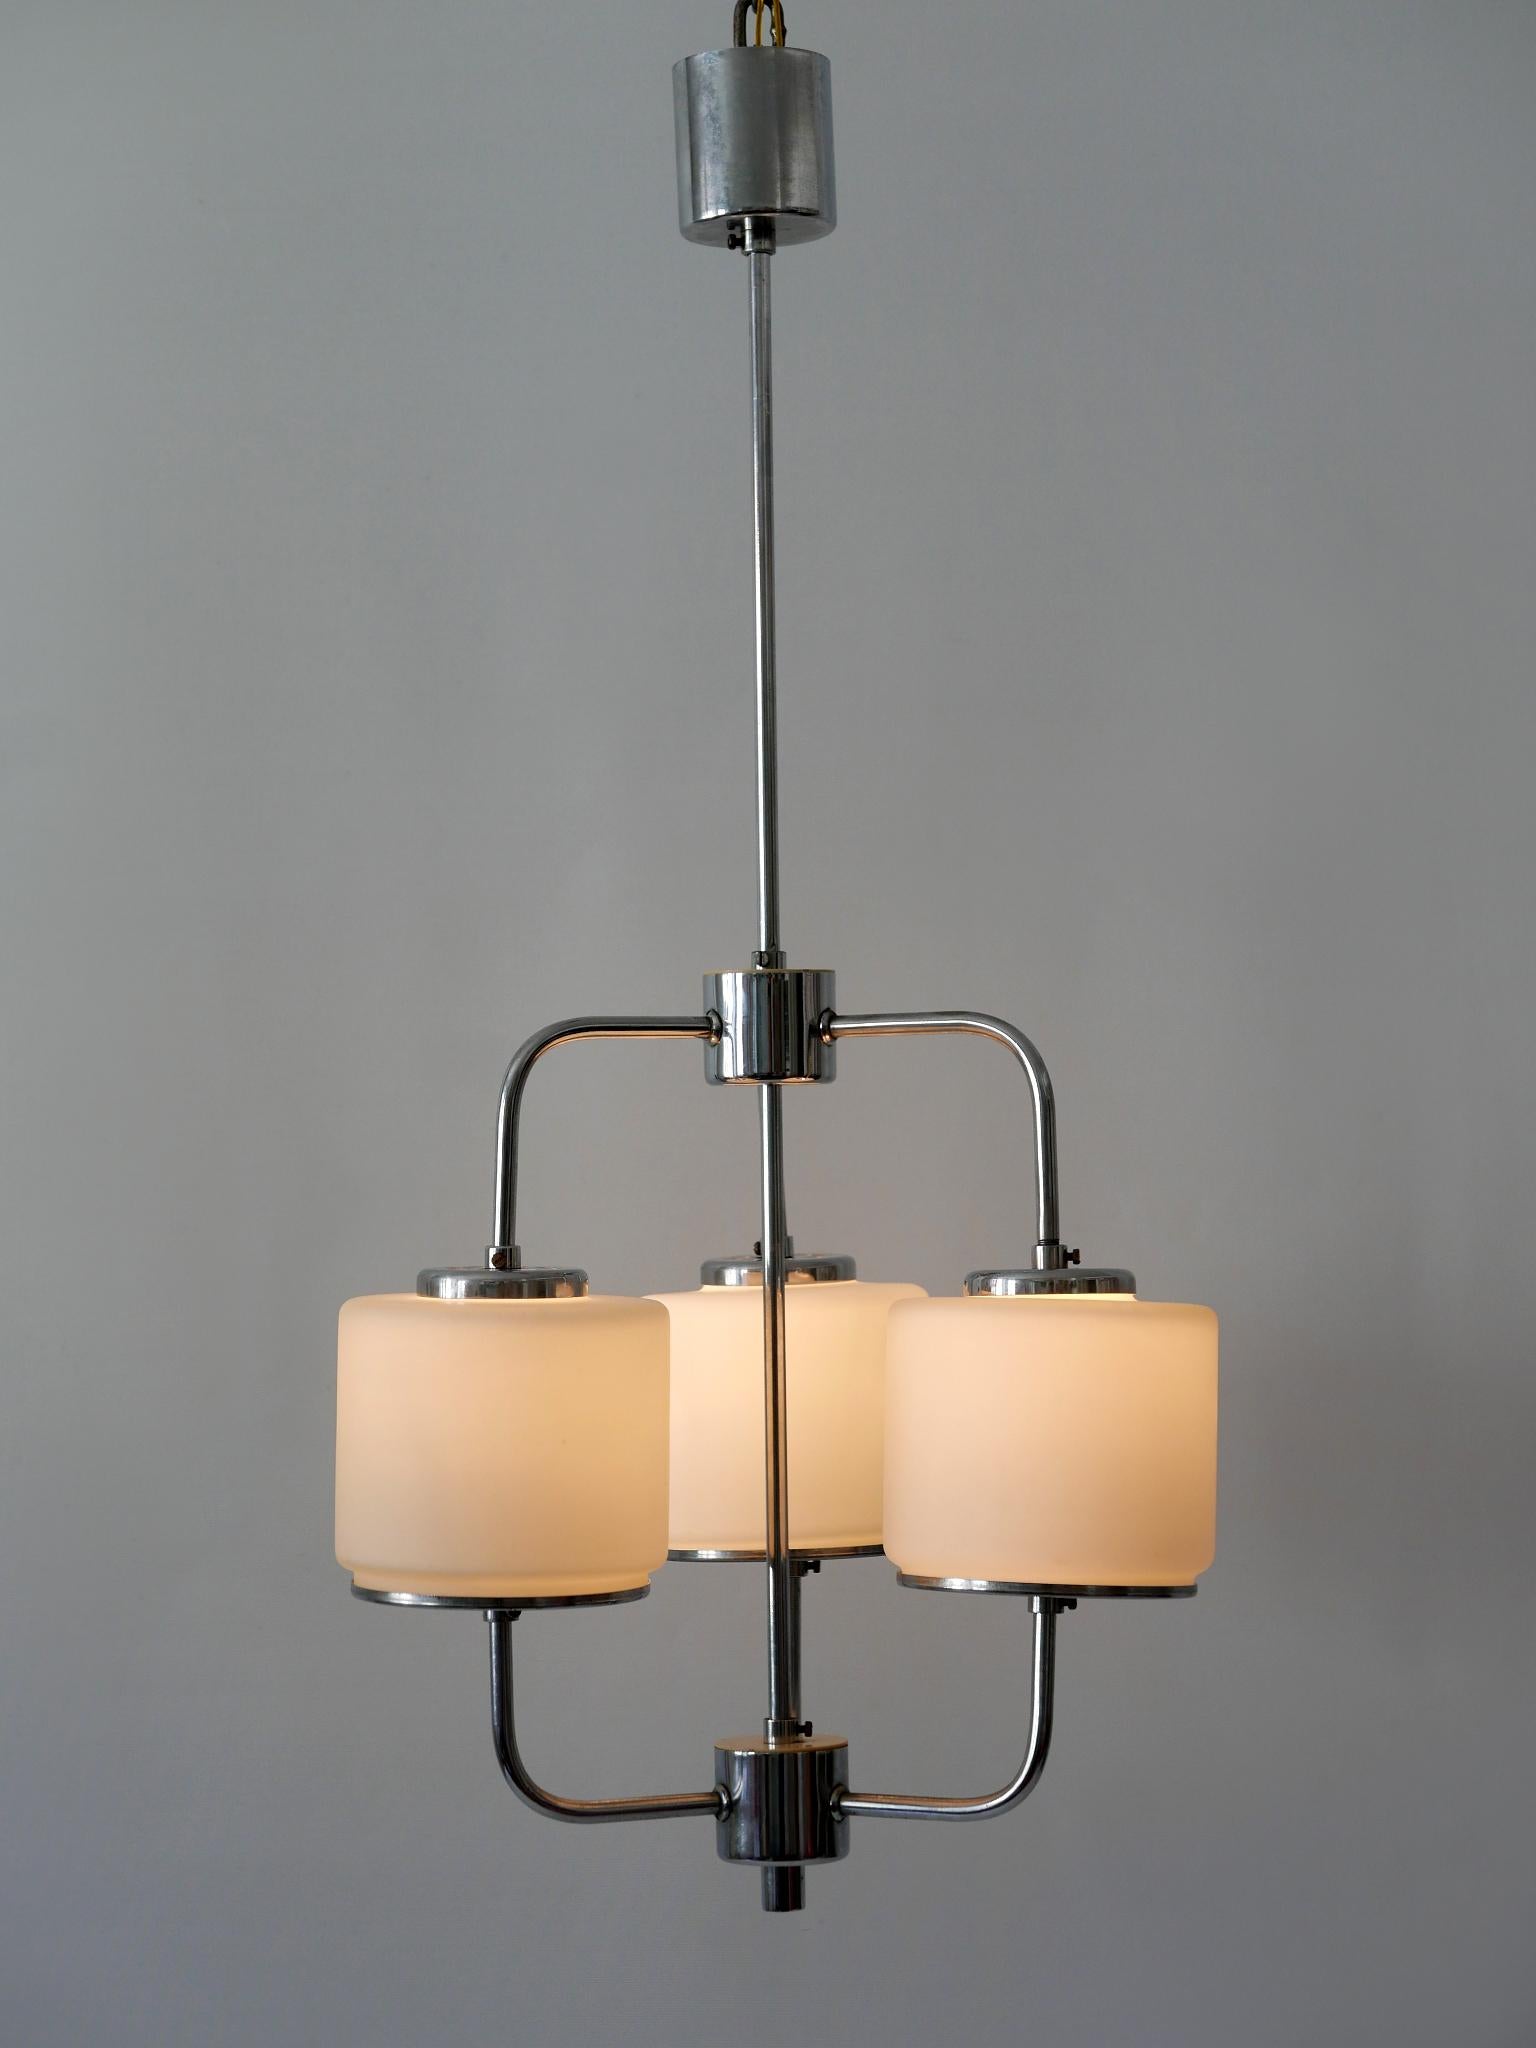 Rare and beautiful Bauhaus or Art Deco pendant lamp or chandelier. Designed & manufactured in Germany, 1930s.

Executed in opaline glass and chrome-plated brass, the pendant lamp/chandelier needs 3 x E27 / E26 Edison screw fit bulbs. It is wired,